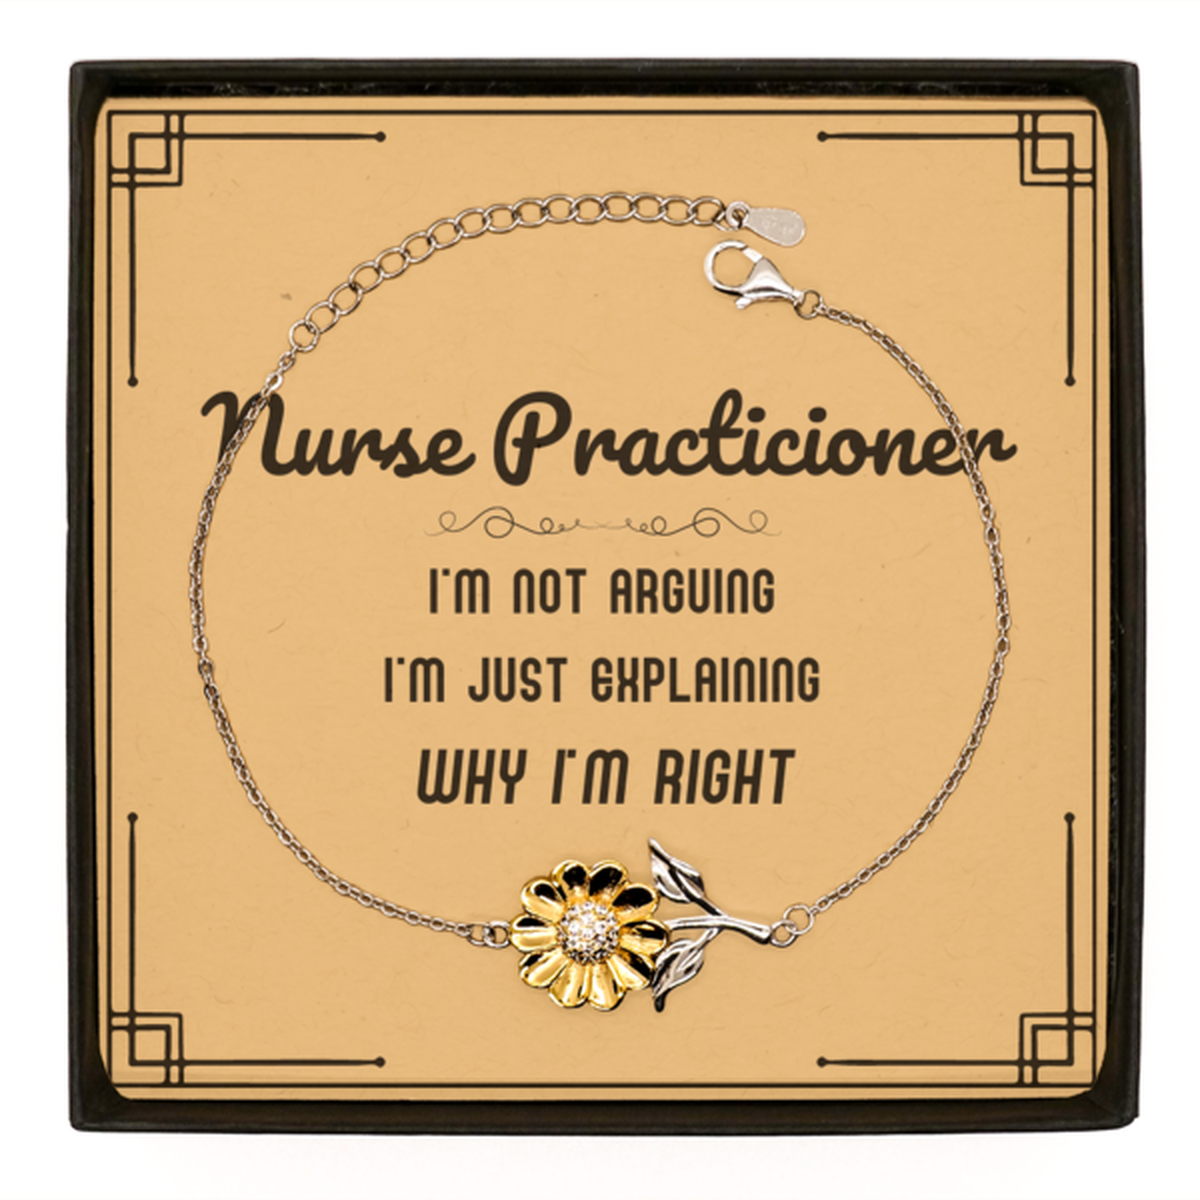 Nurse Practicioner I'm not Arguing. I'm Just Explaining Why I'm RIGHT Sunflower Bracelet, Funny Saying Quote Nurse Practicioner Gifts For Nurse Practicioner Message Card Graduation Birthday Christmas Gifts for Men Women Coworker